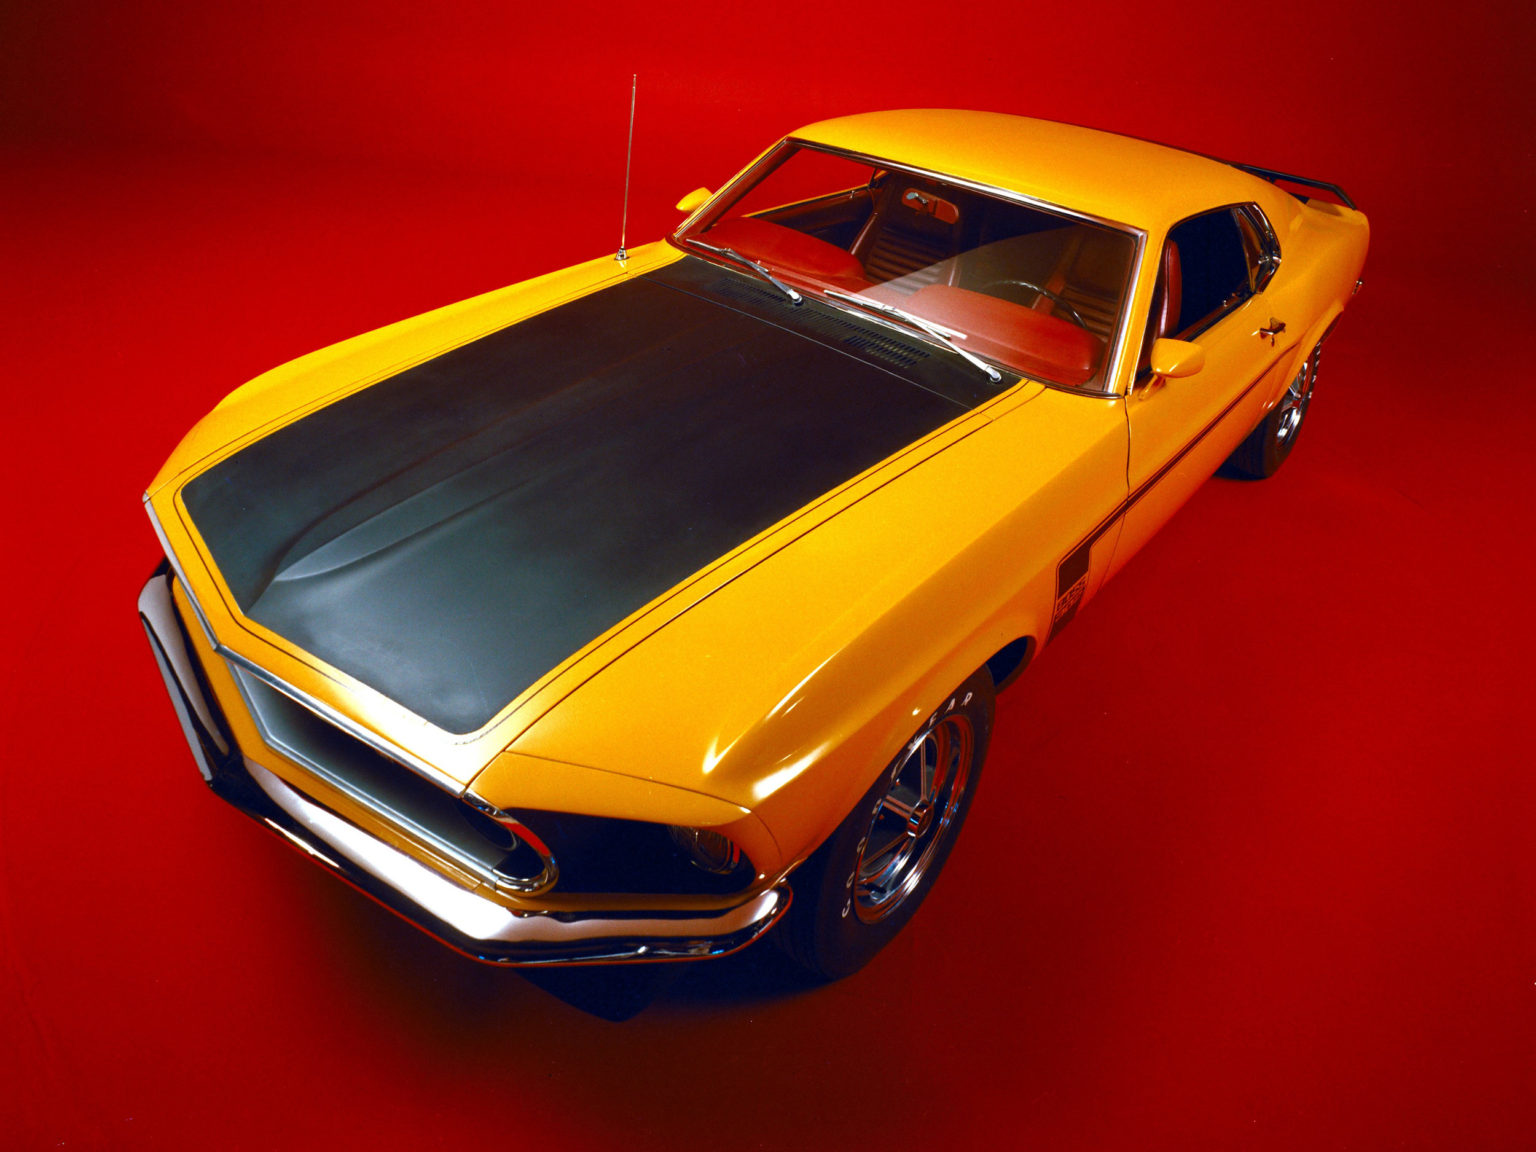 The 1969 Ford Mustang Boss 302 is the very definition of American muscle.